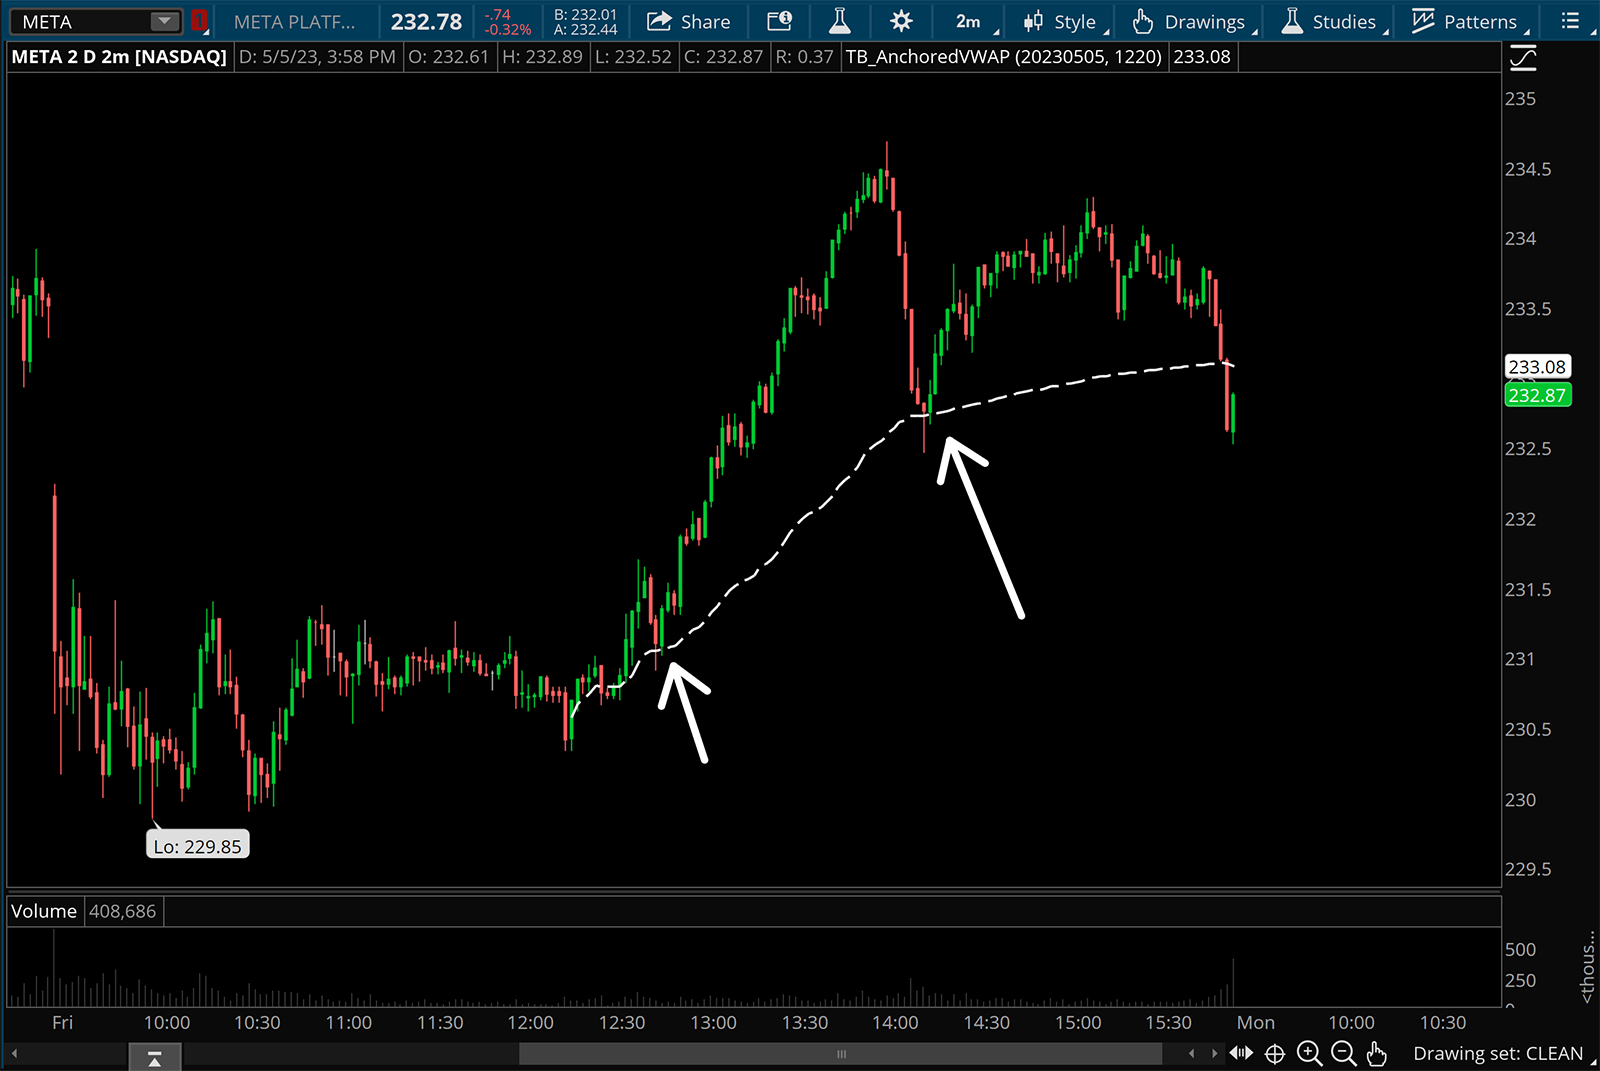 Meta anchored VWAP examples from an intraday low.